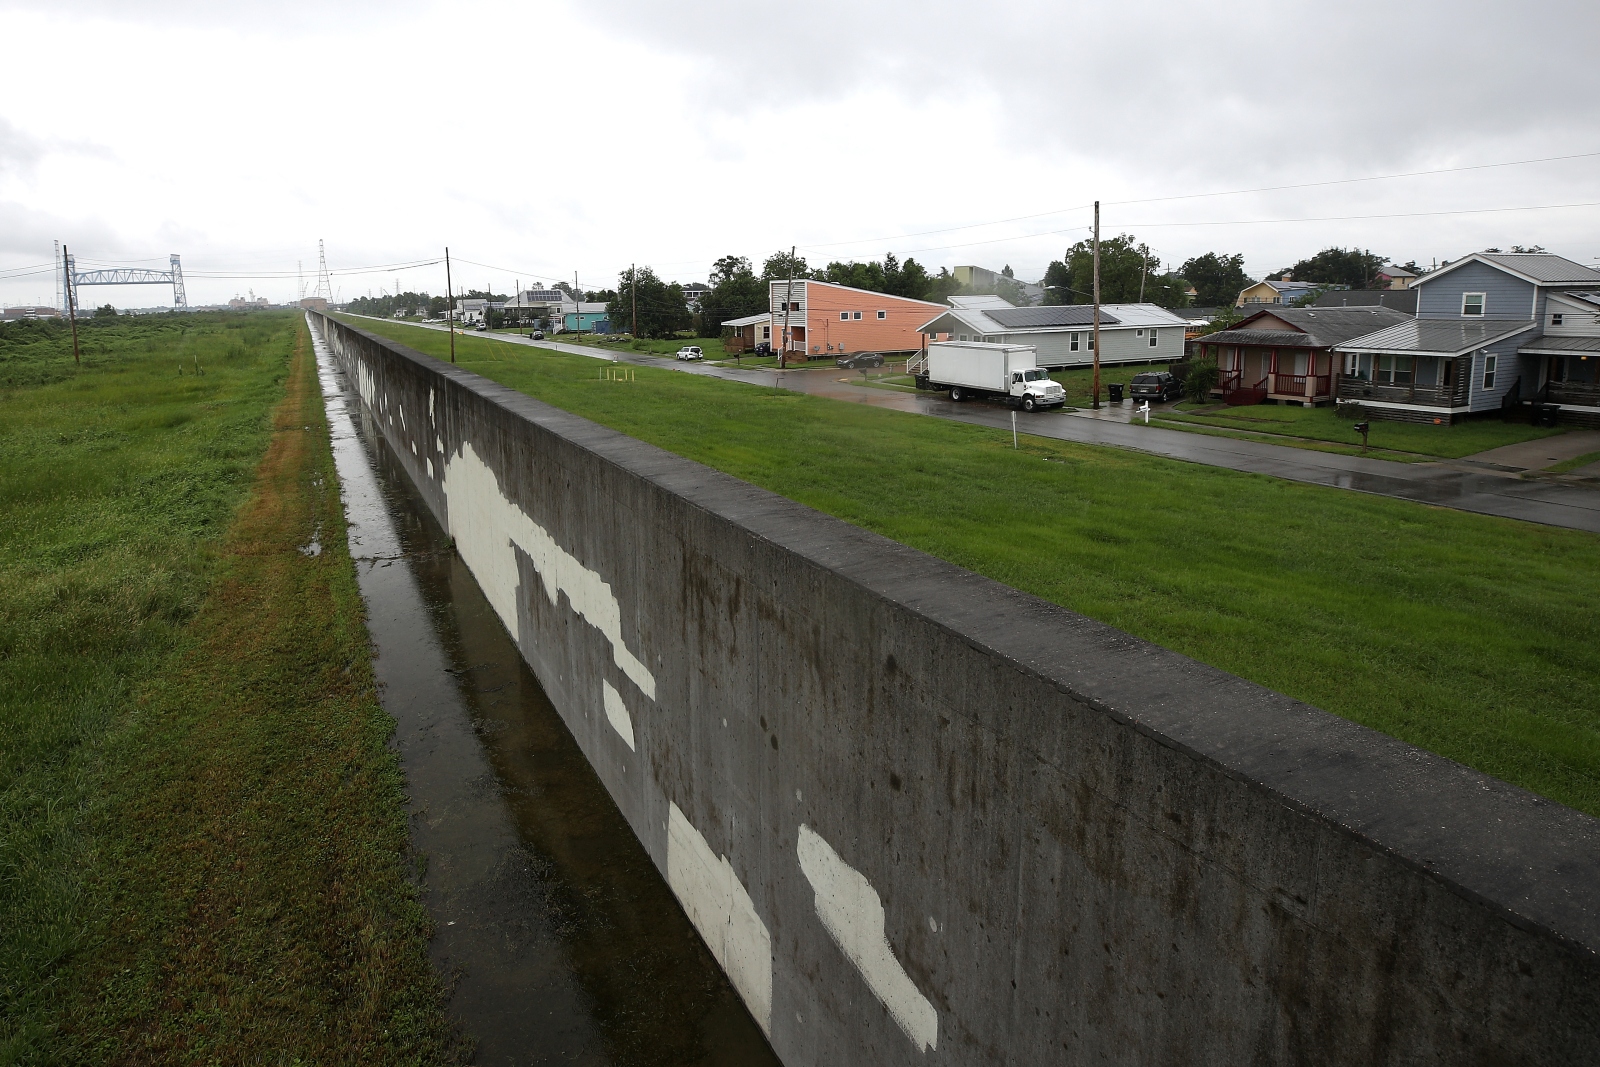 A rebuilt levee wall in the Lower Ninth Ward of New Orleans. The U.S. Army Corps of Engineers has spent billions of dollars on new levees and flood walls in Louisiana since Hurricane Katrina.